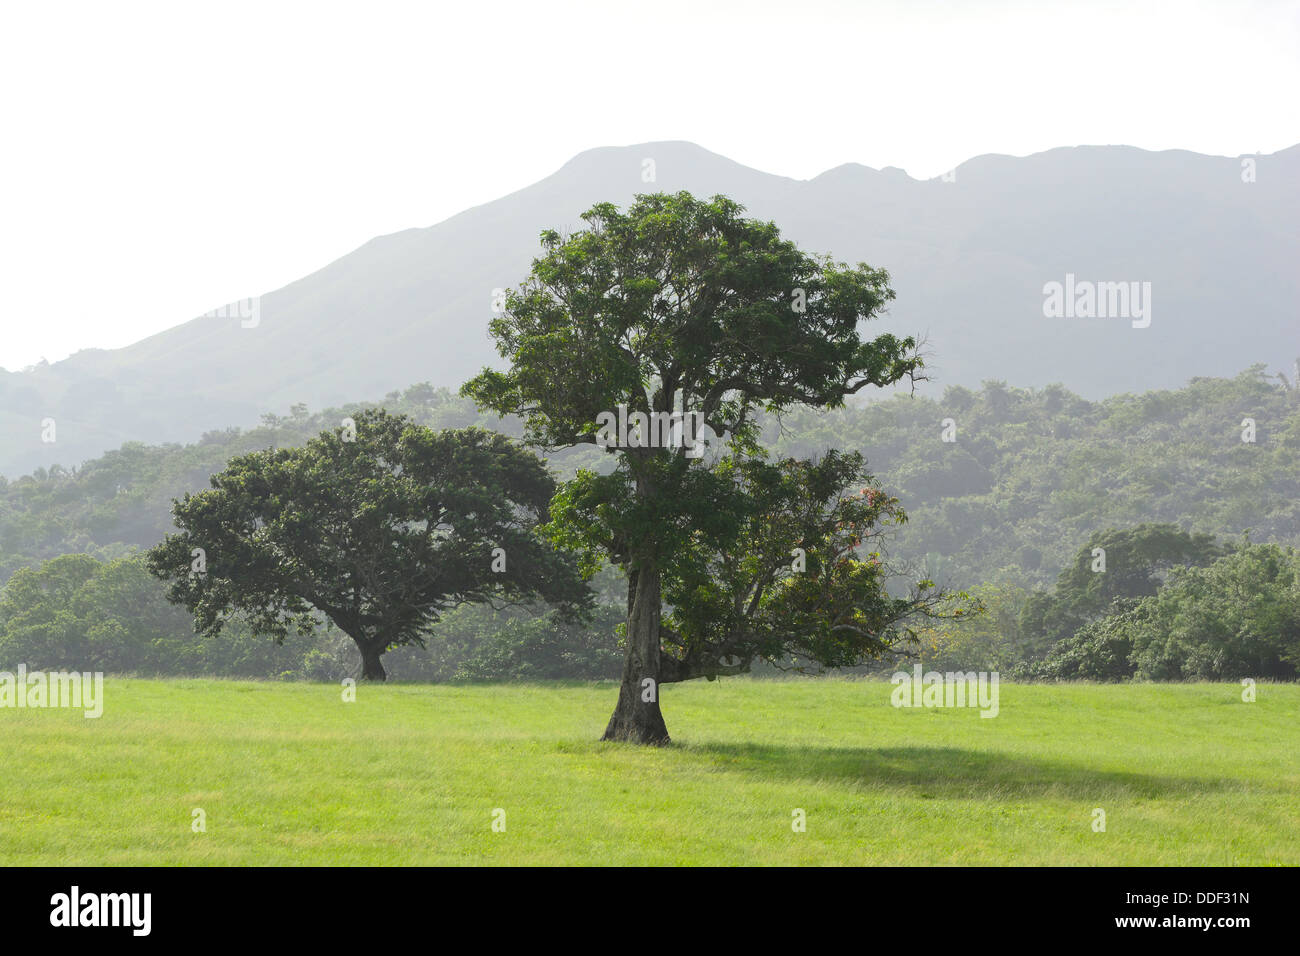 Big tree in the middle of a green field with mountains in the background Stock Photo